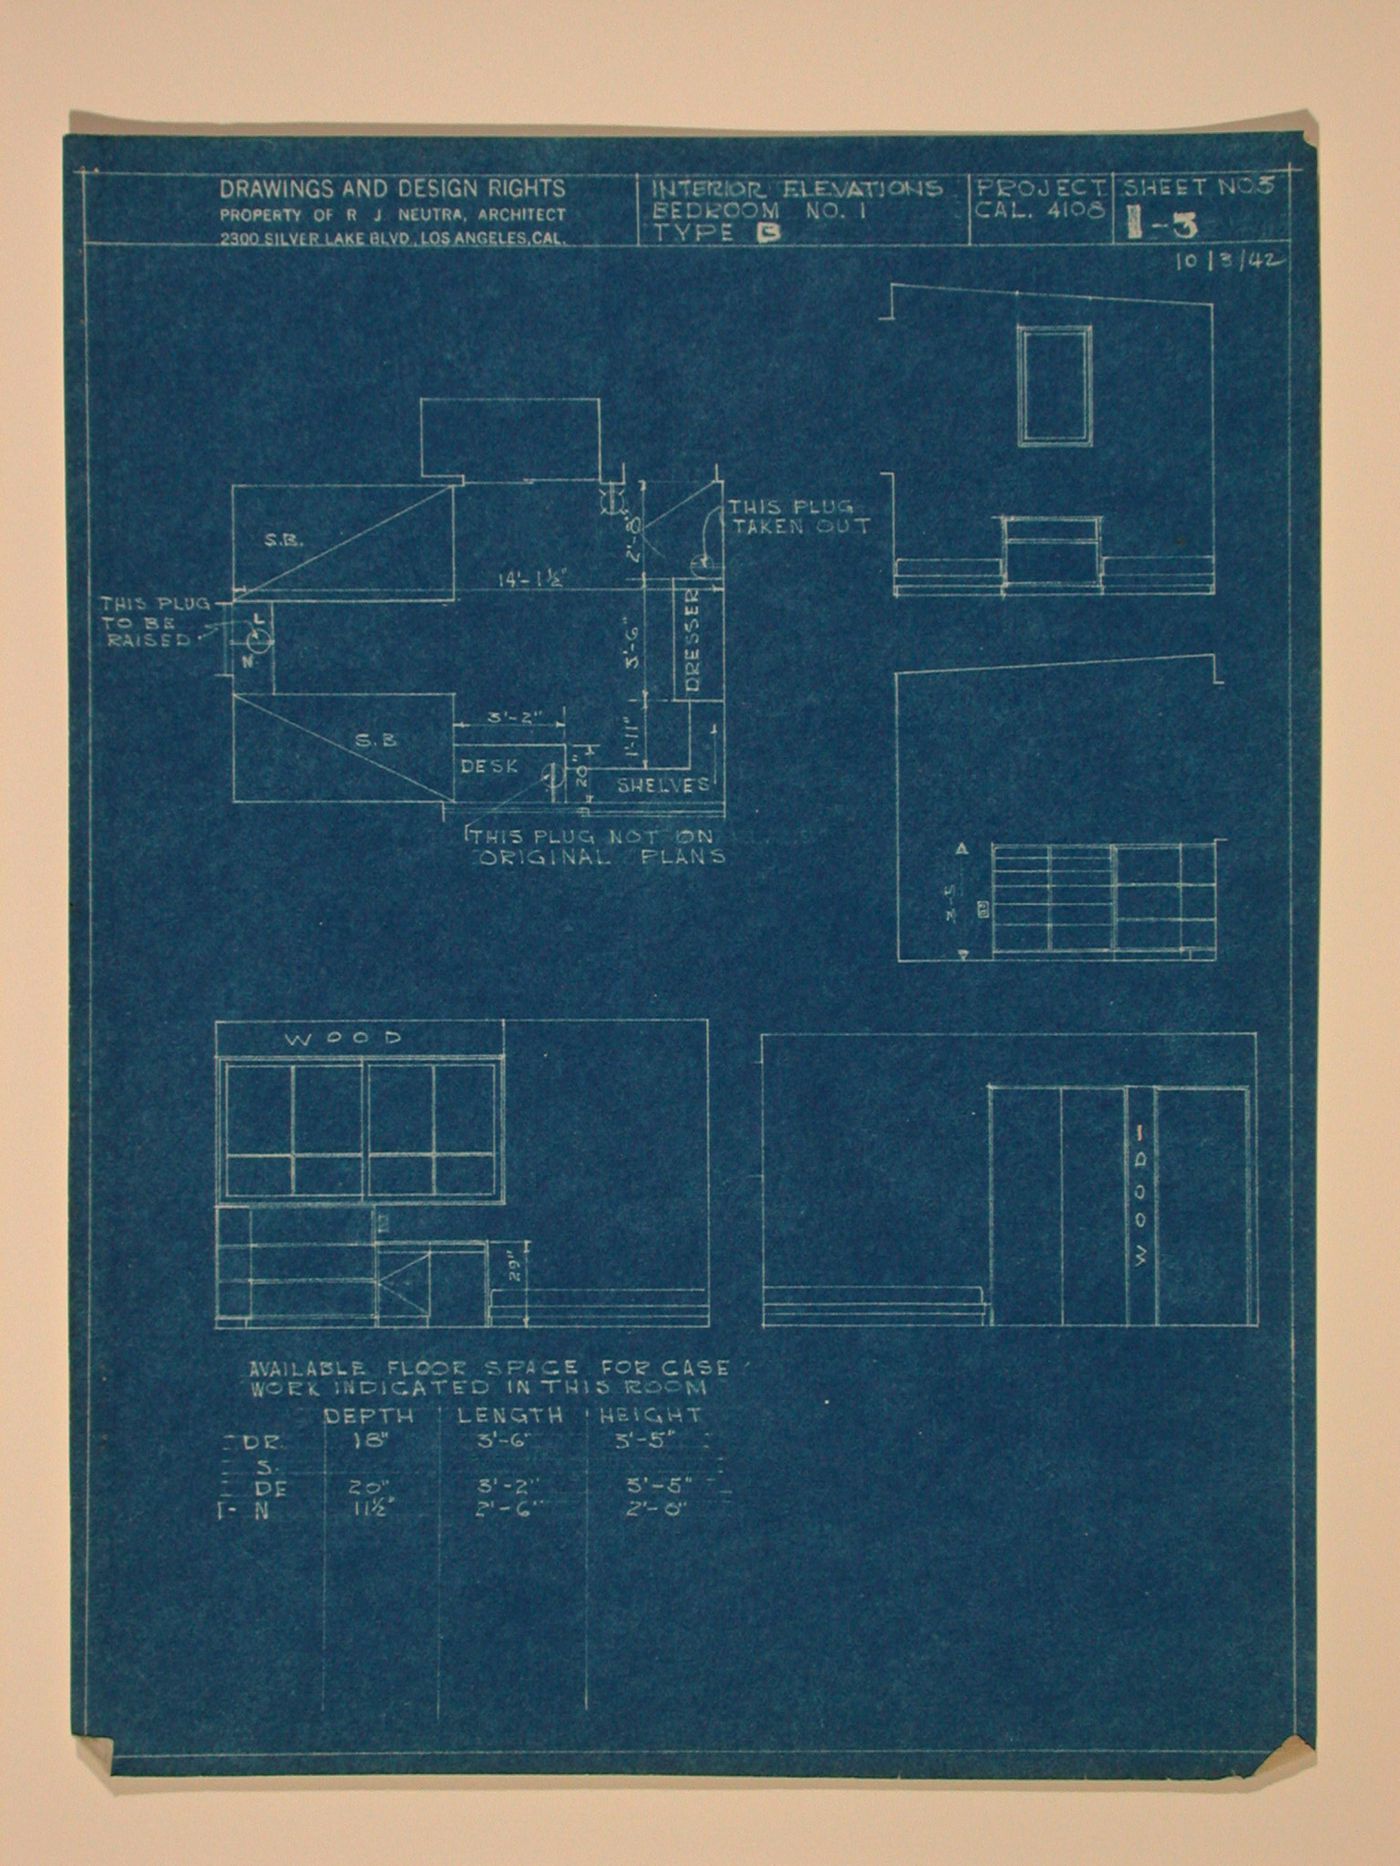 Interior elevations and plan for bedroom no. 1 type "B"